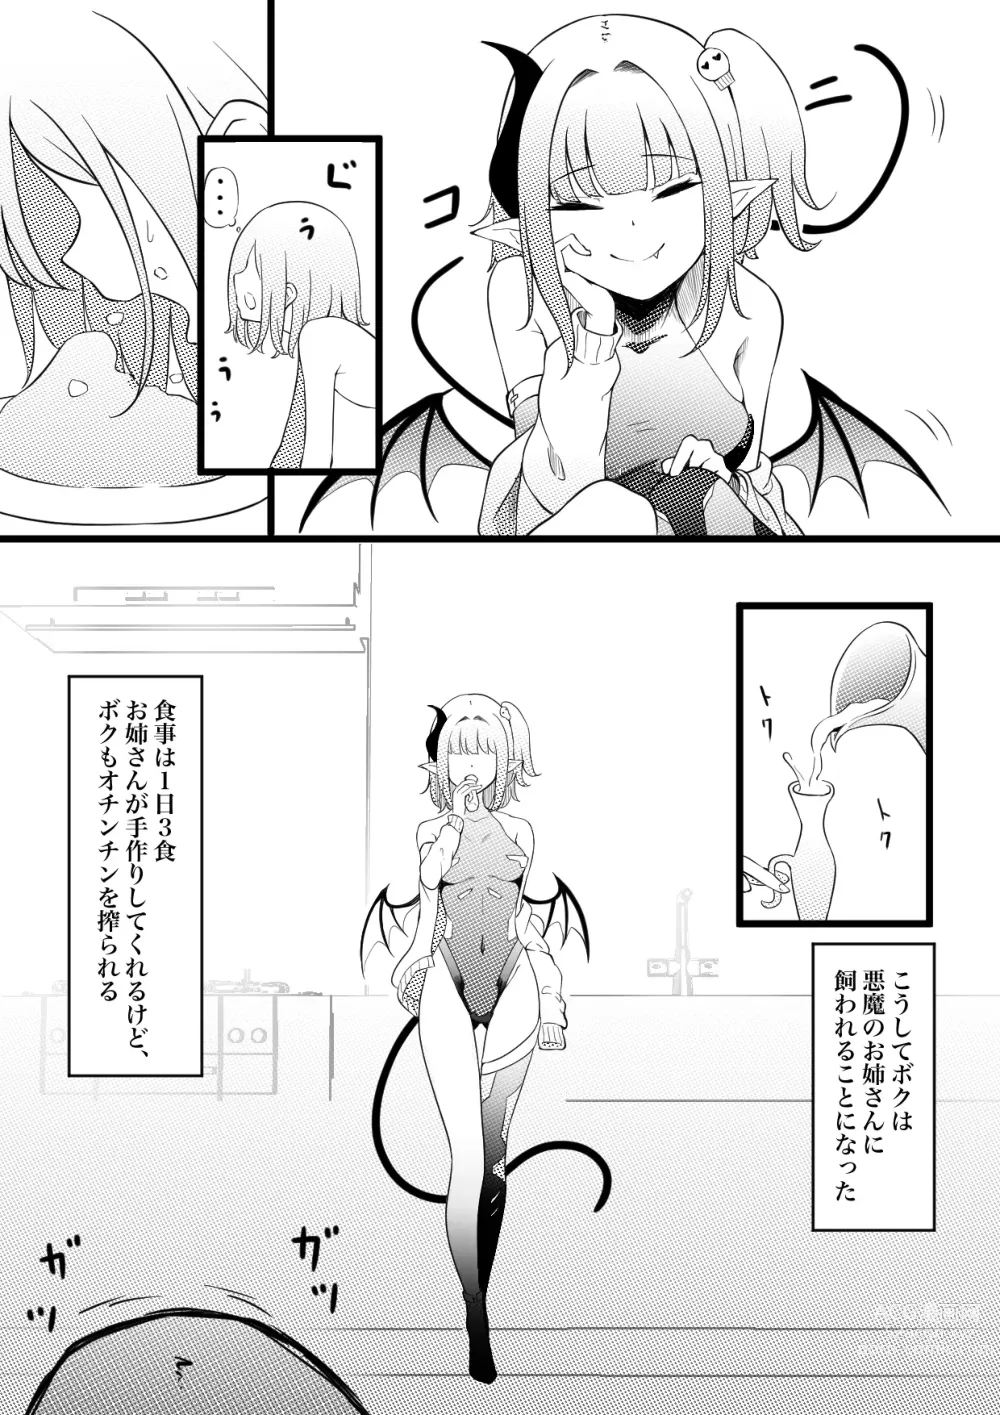 Page 12 of doujinshi permission